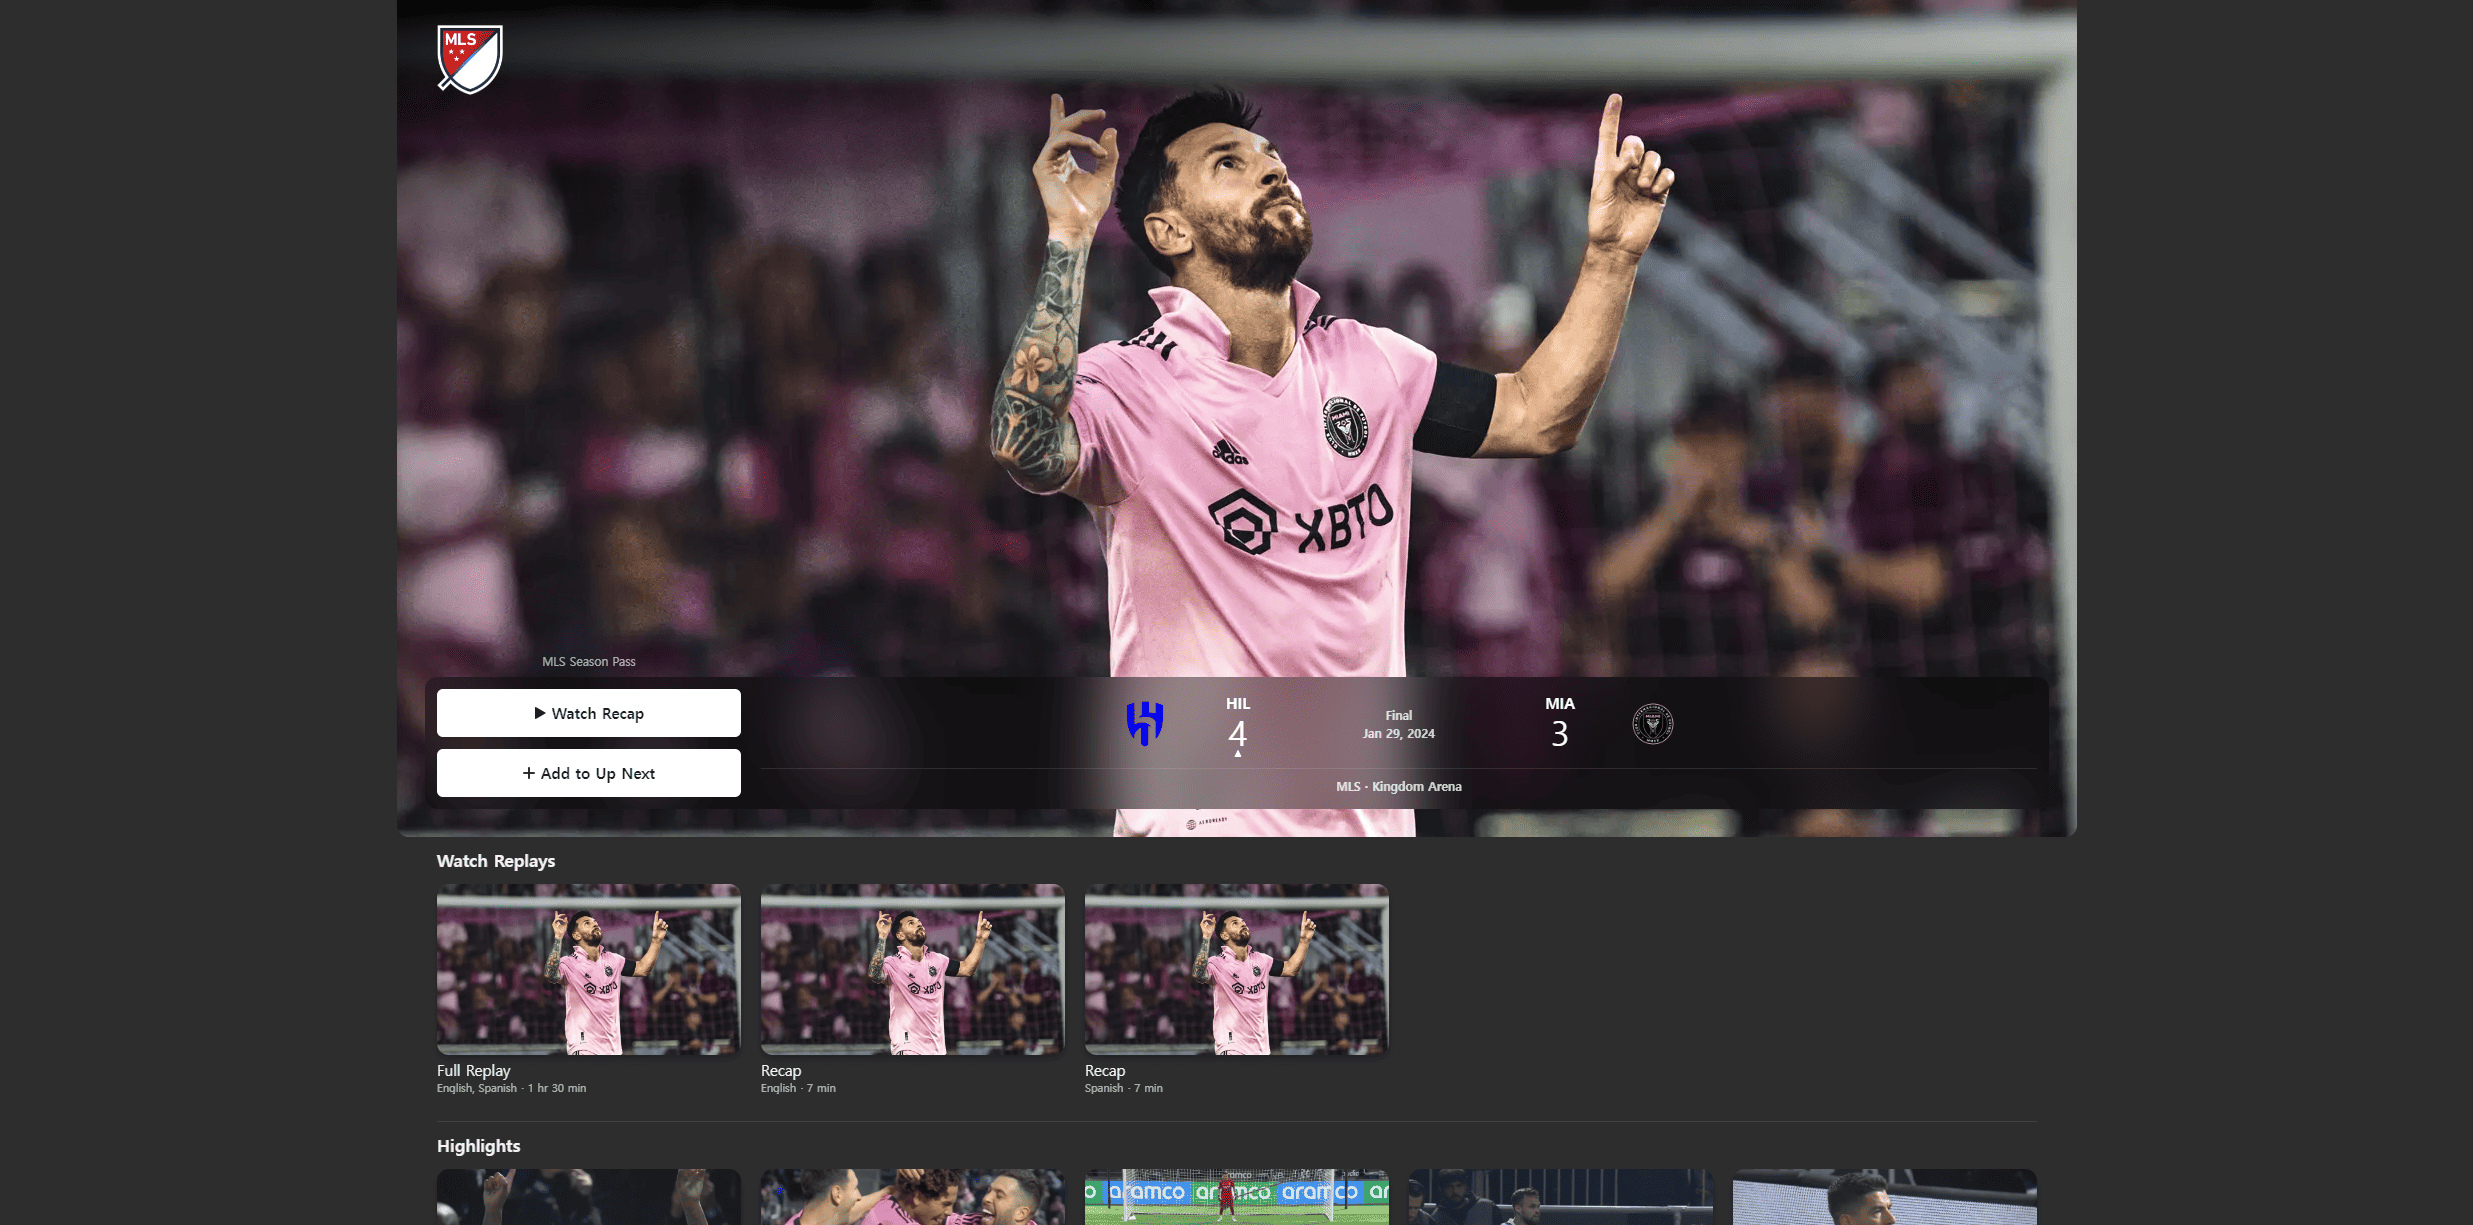 A screenshot of a soccer player on TV in this image from Apple TV